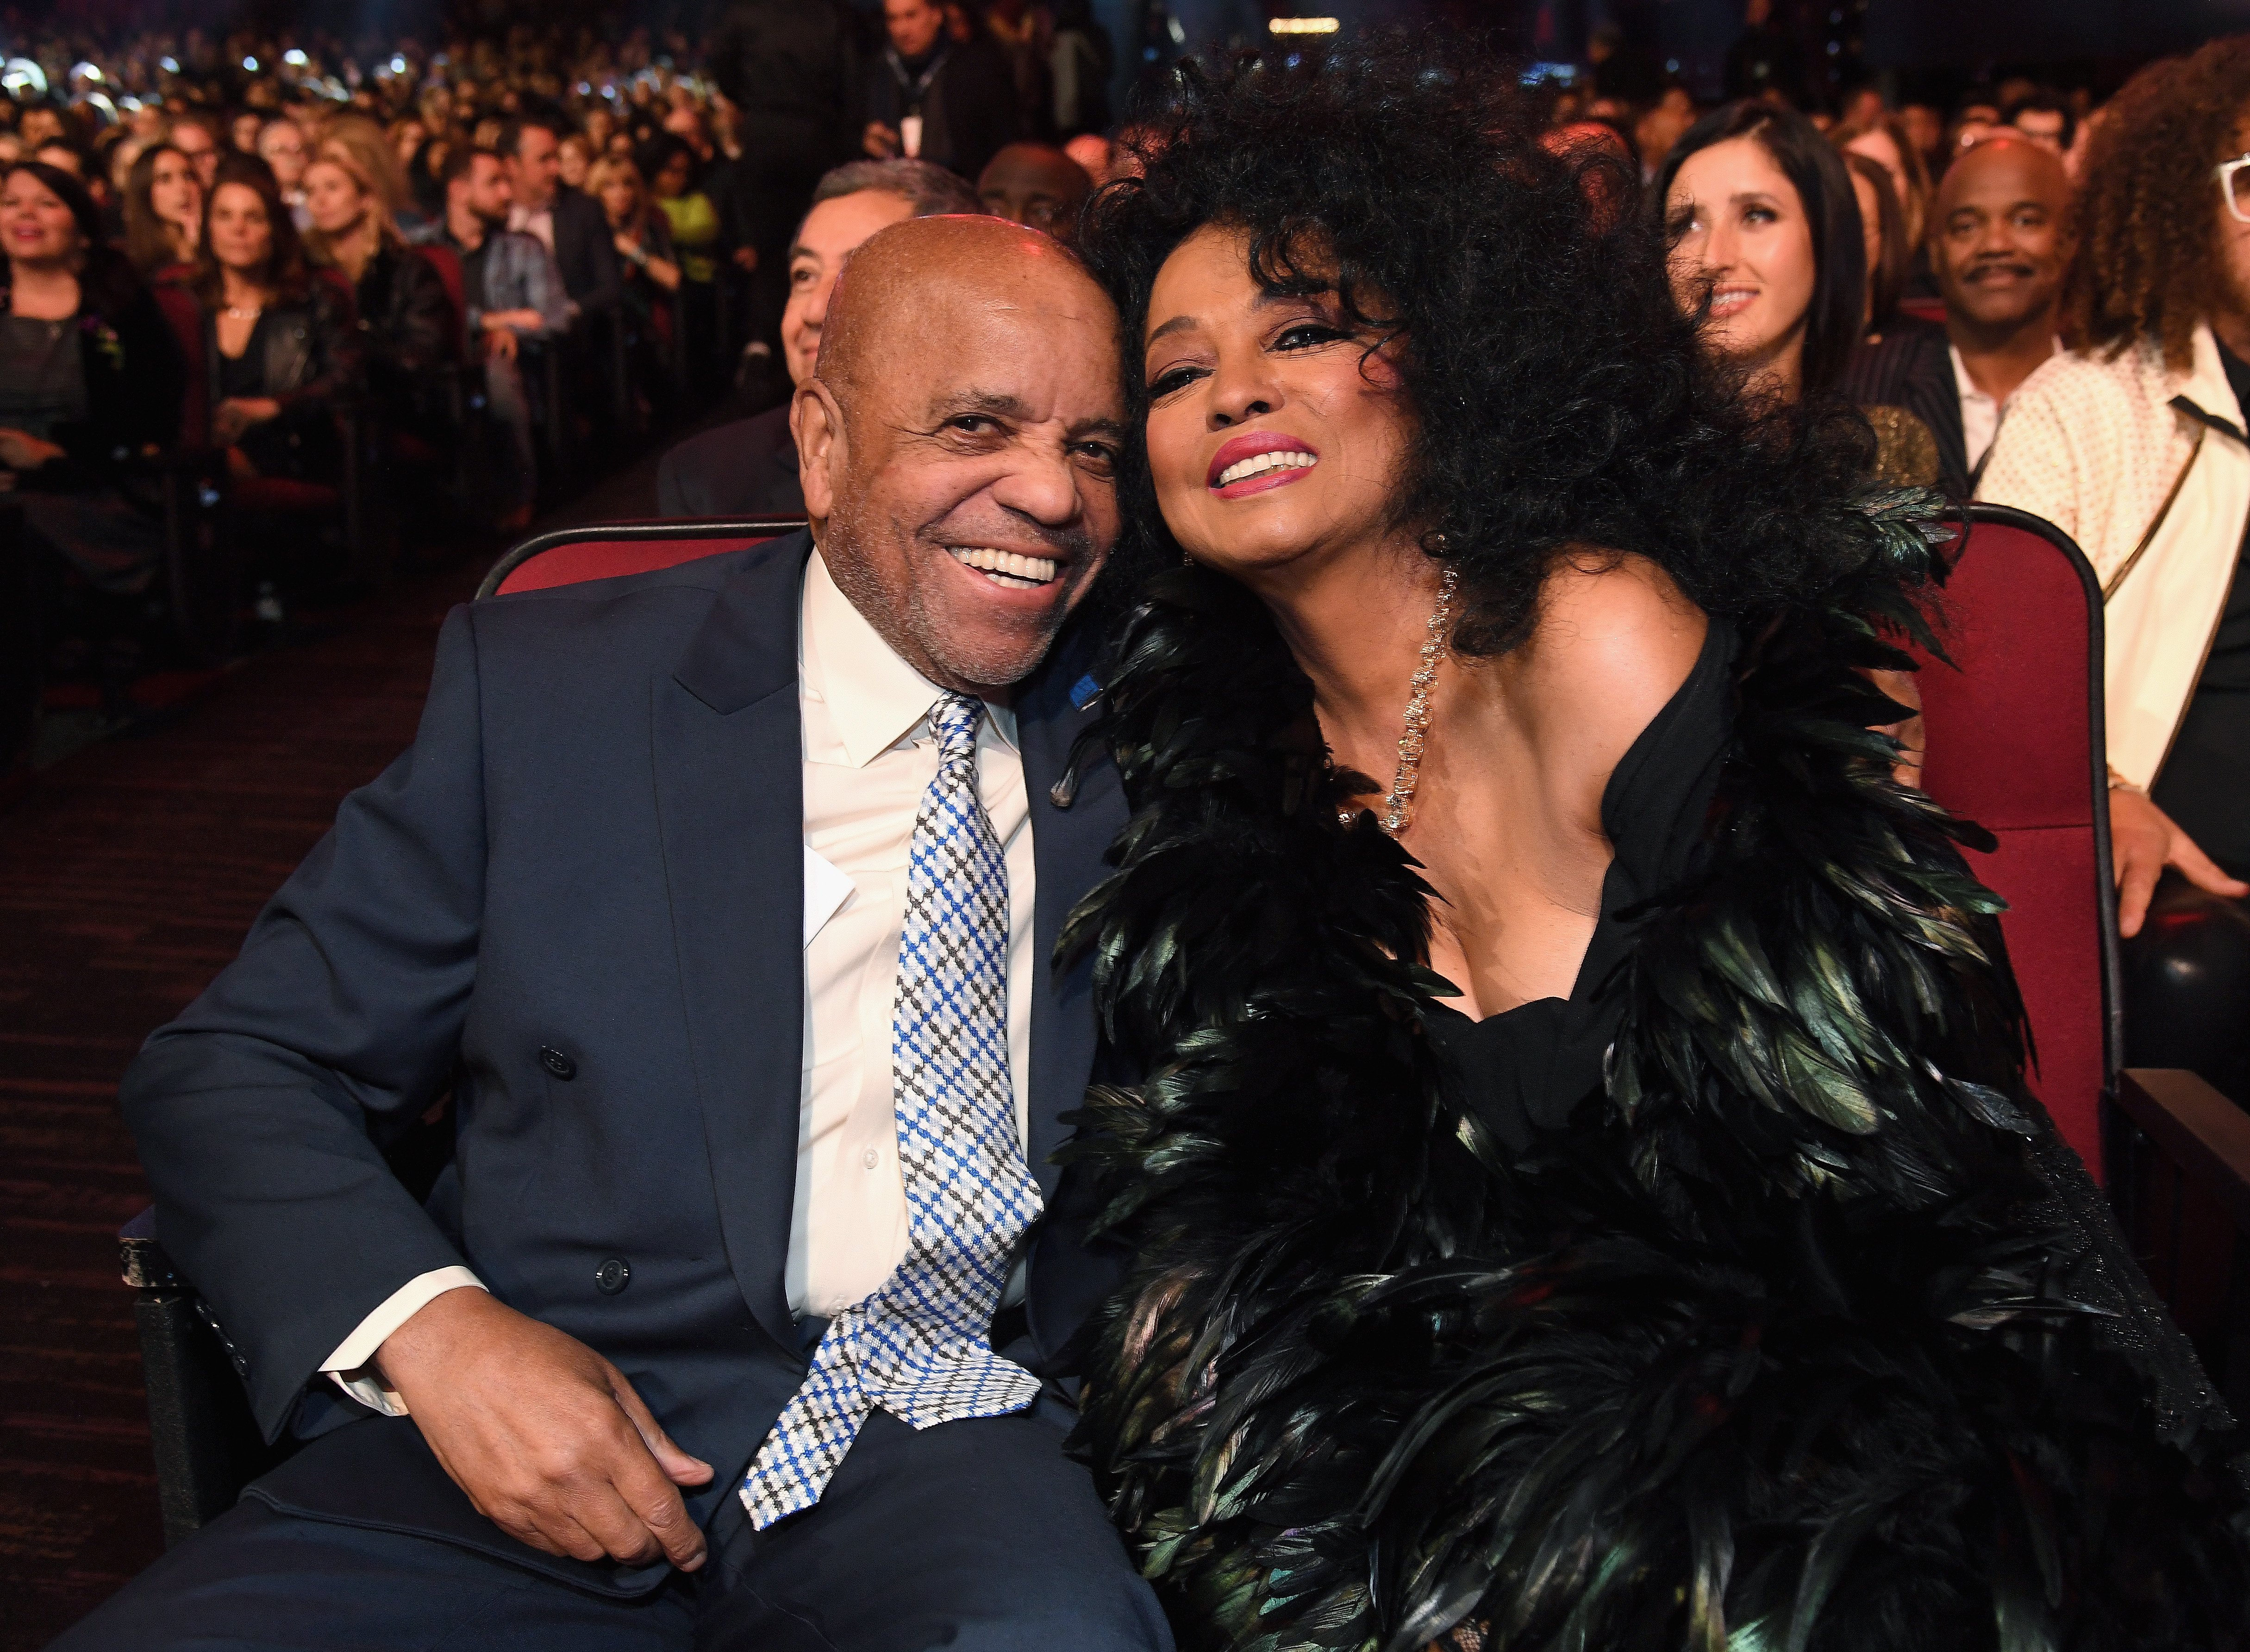 Berry Gordy and Diana Ross attend Motown 60: A Grammy Celebration at Microsoft Theater on February 12, 2019 in Los Angeles, California | Photo: Getty Images